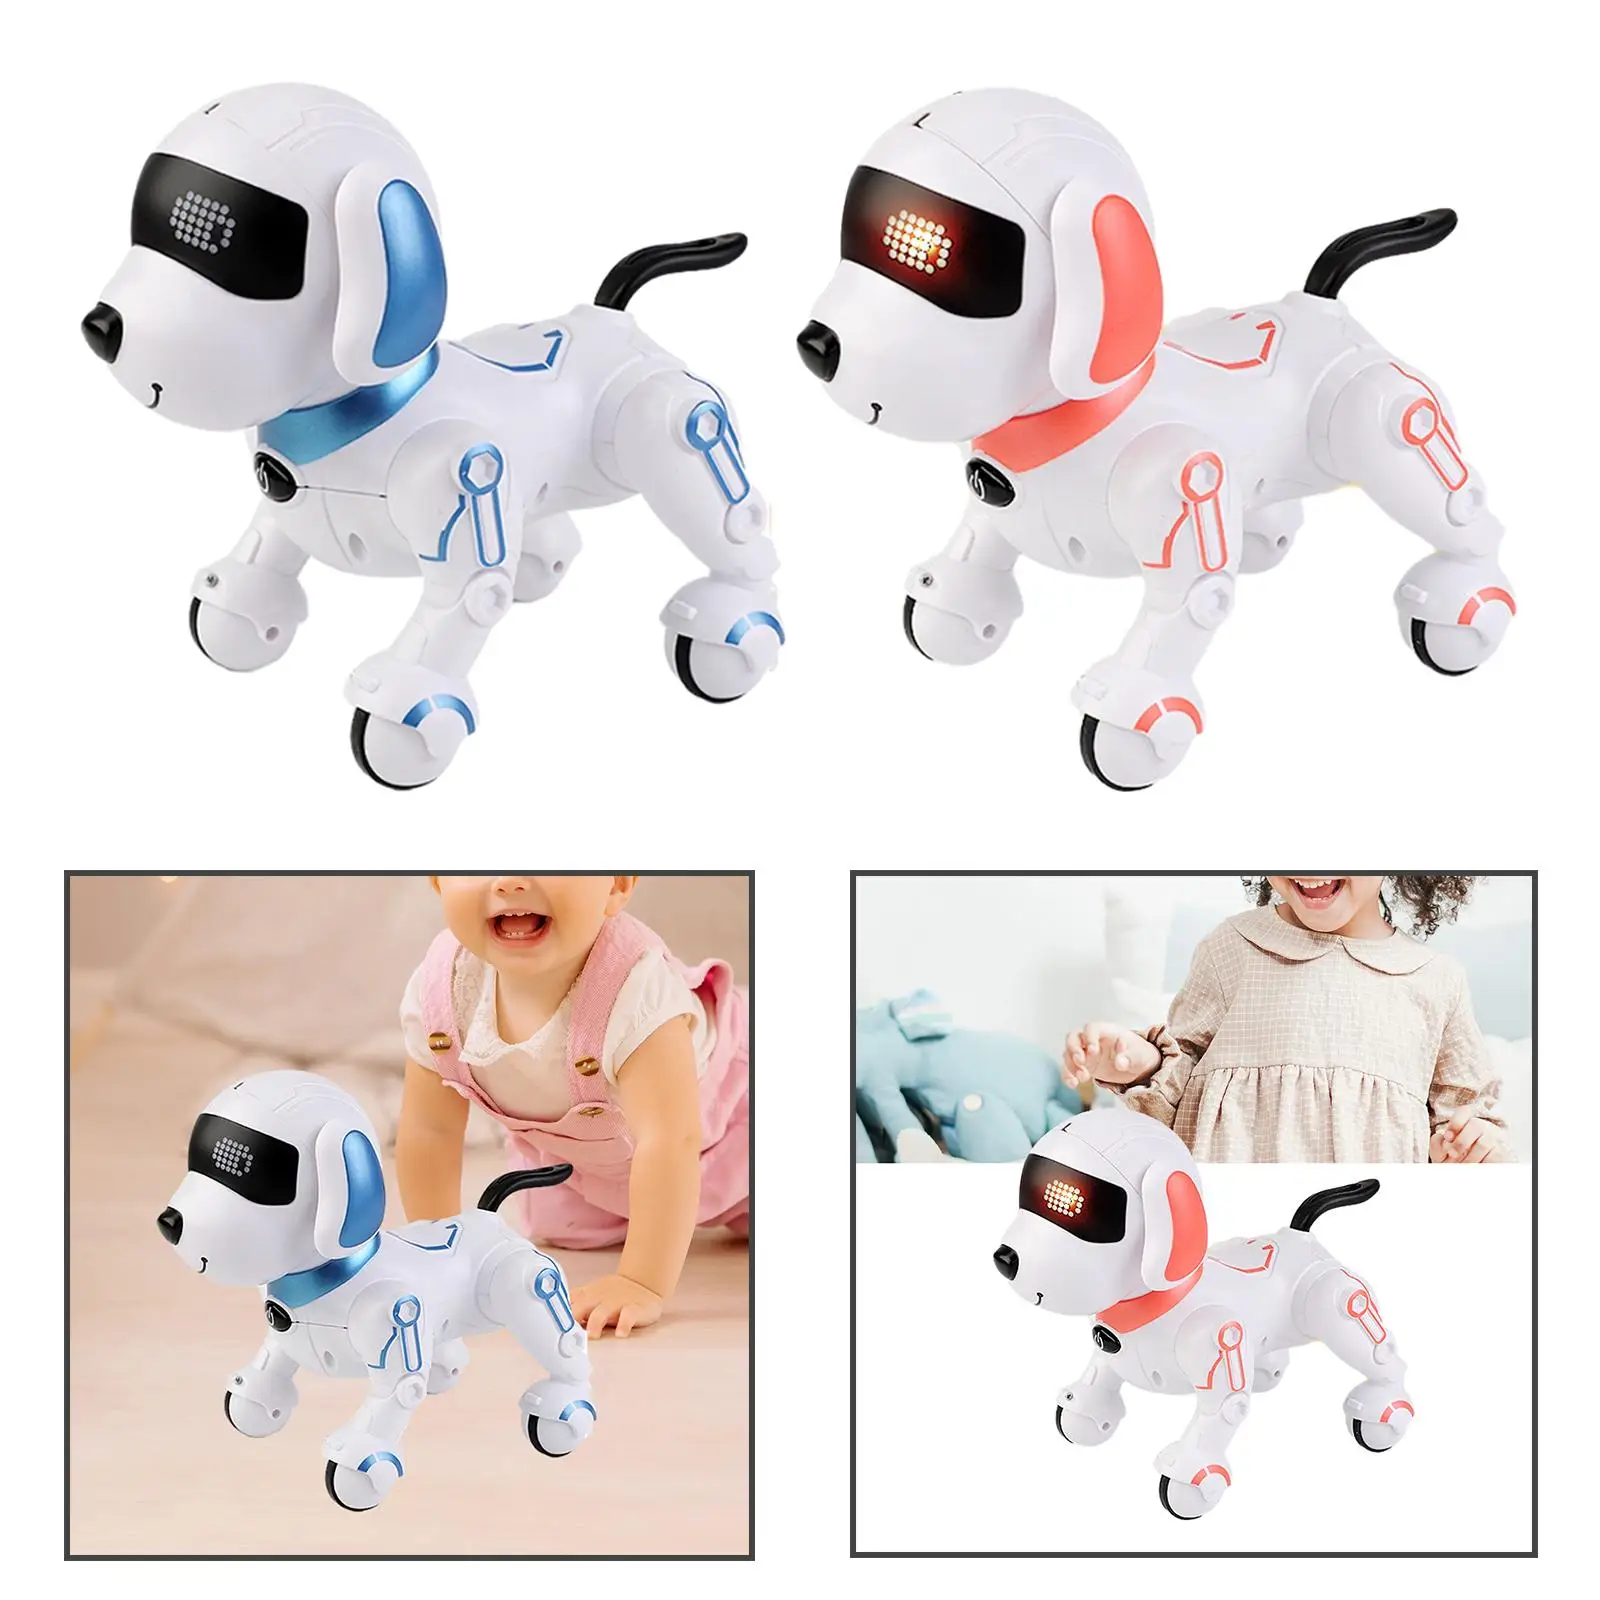 Remote Control Robot Dog Toy for Children Boys and Girls Age 5 6 7 8 9 10